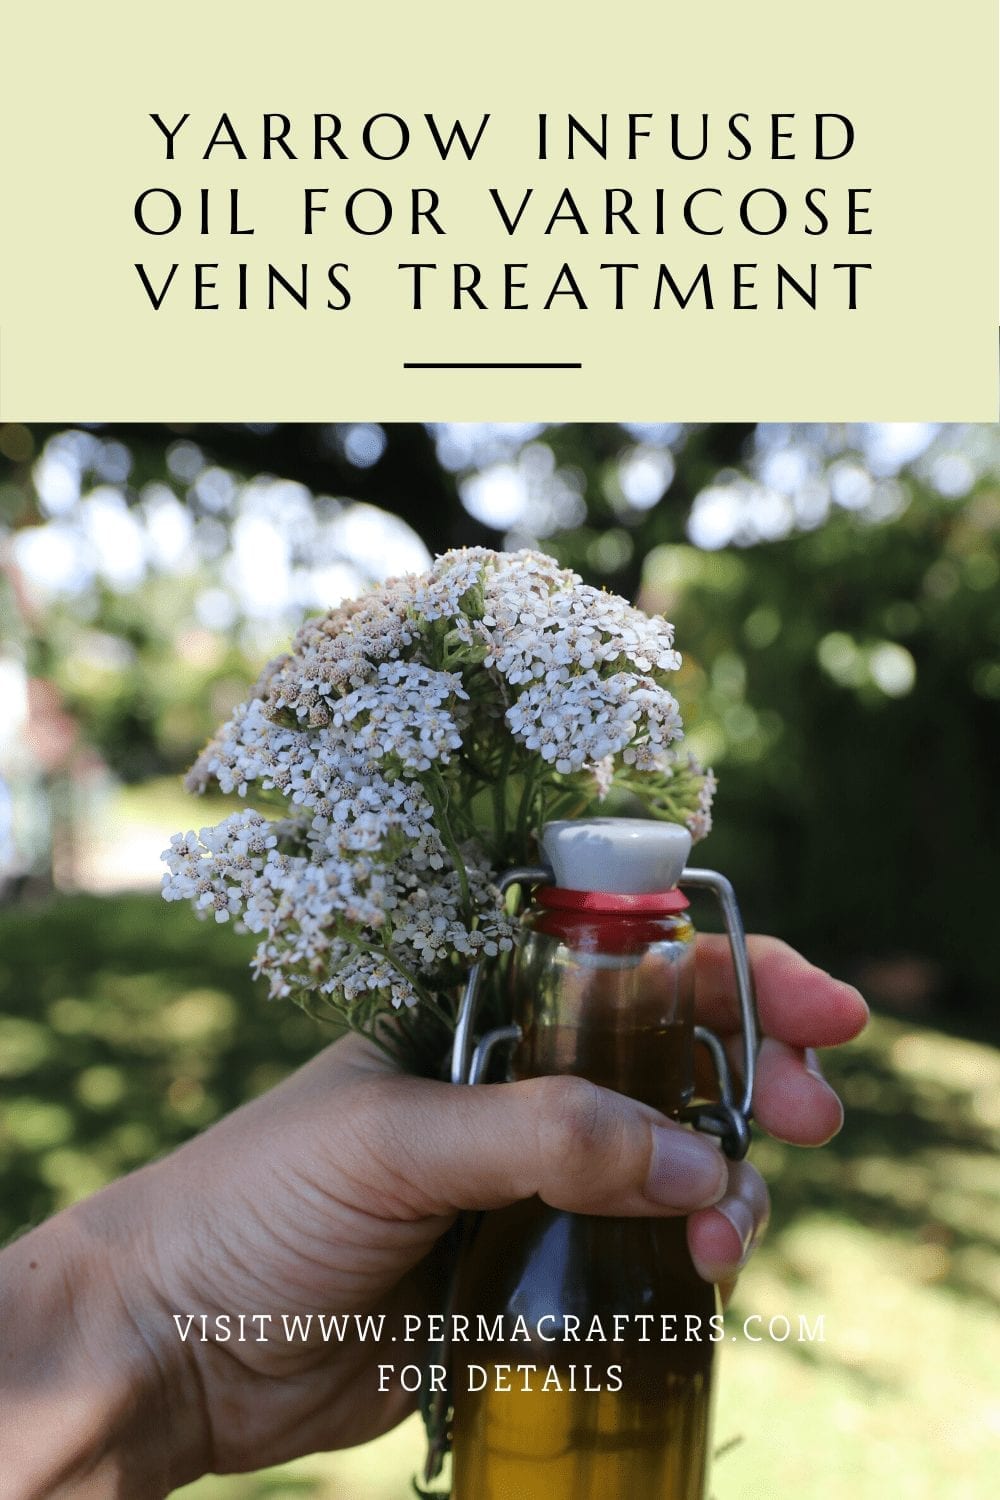 Yarrow Infused Oil for Varicose Veins Treatment BP1